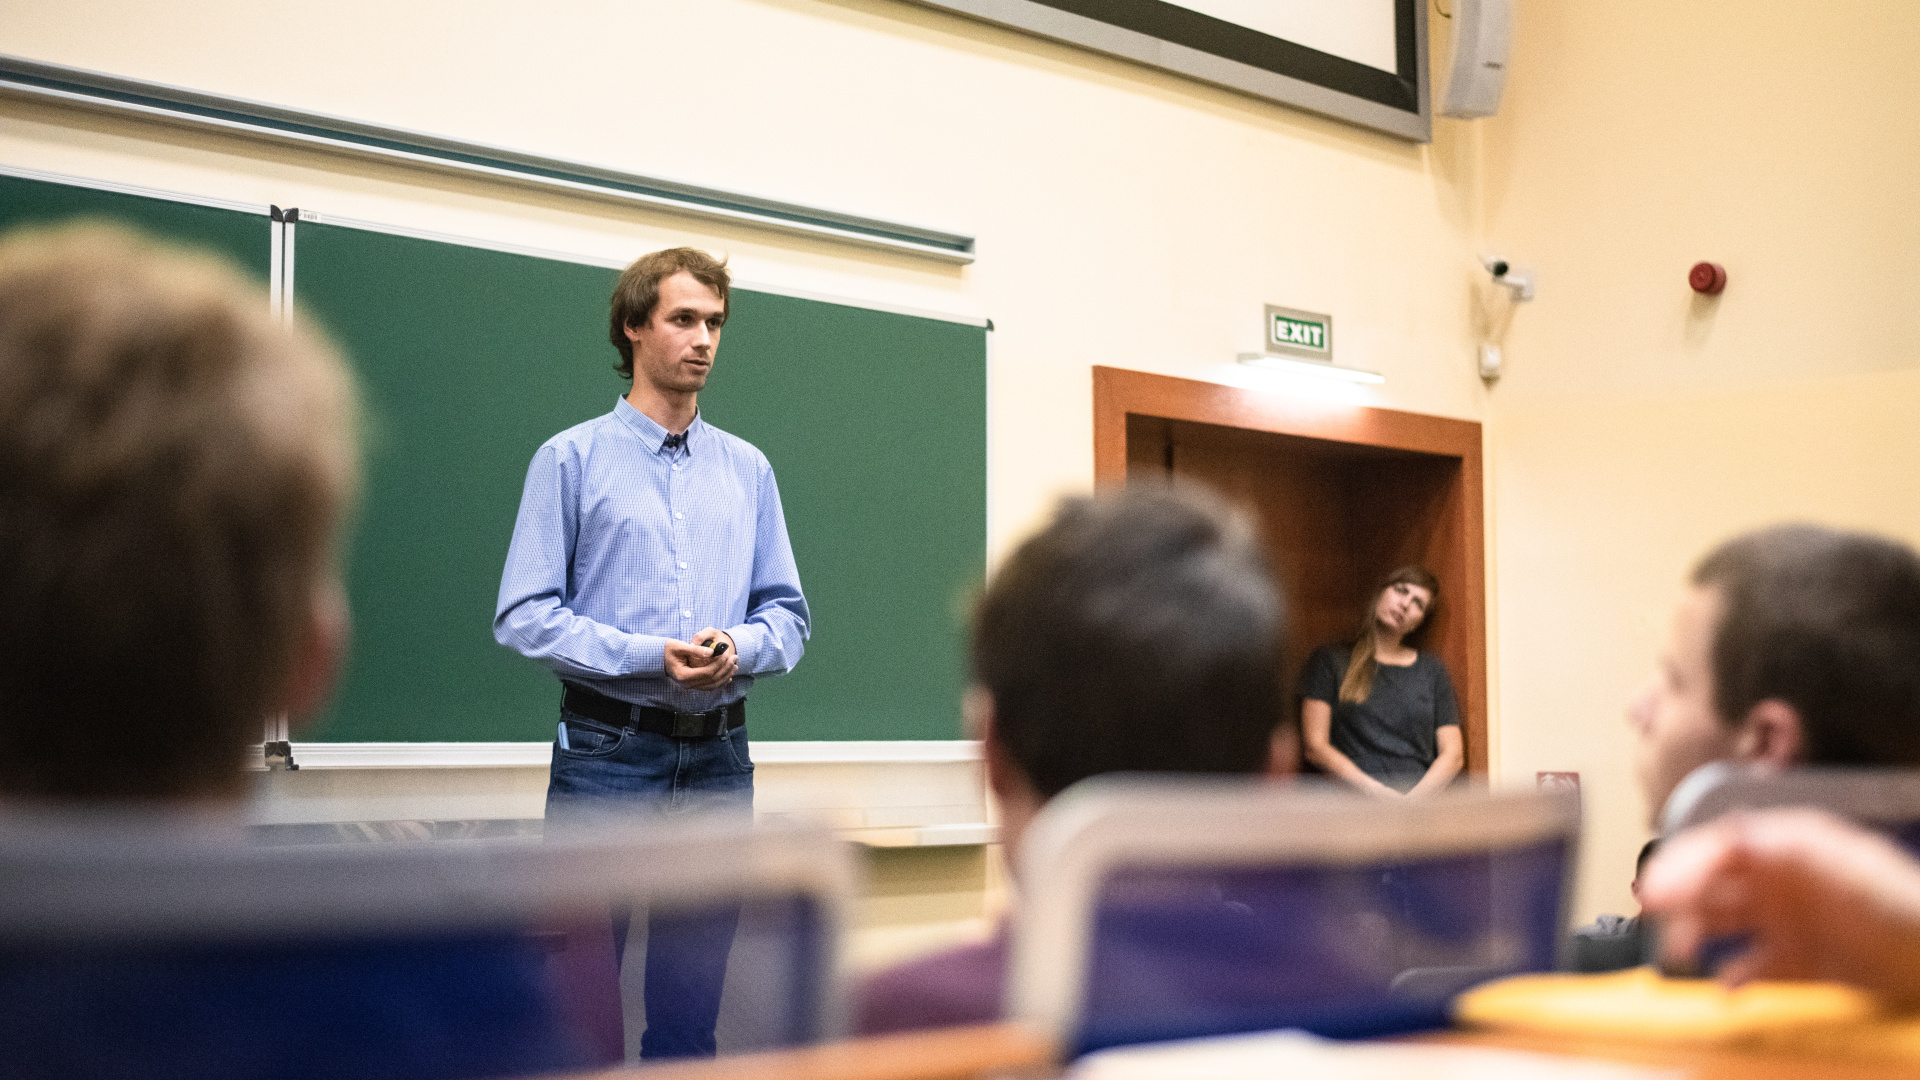 Students' presentation in the lecture hall